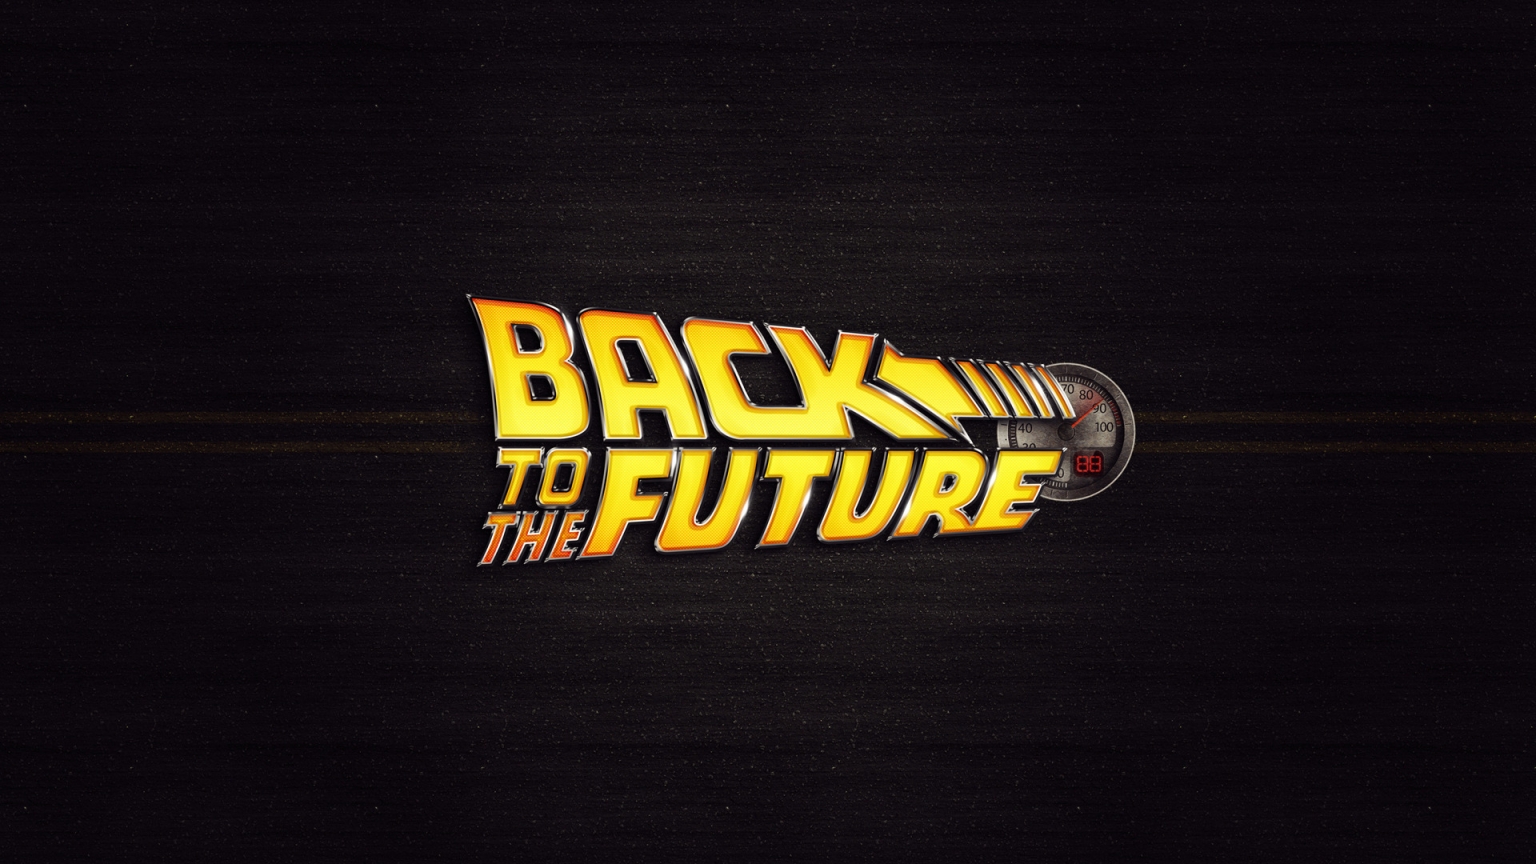 Back to the Future for 1536 x 864 HDTV resolution